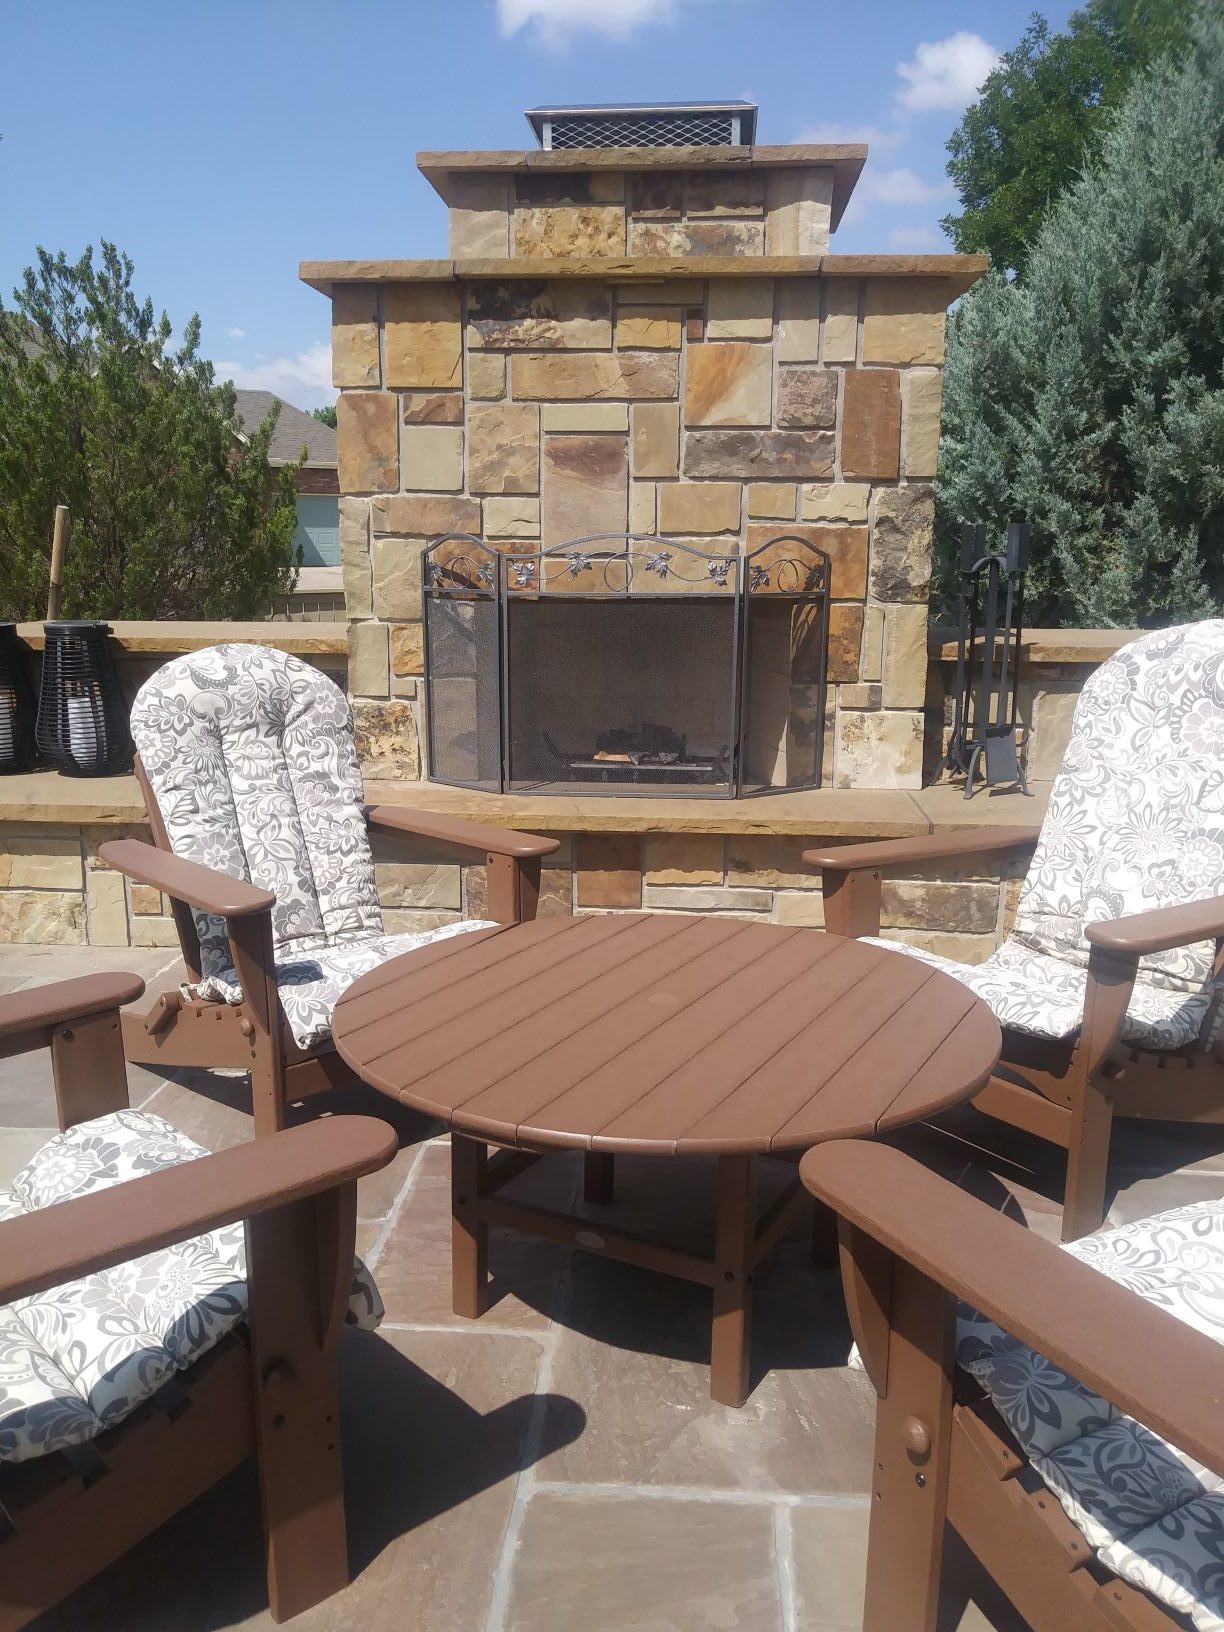 Outdoor Fireplace with large stone chimney and seating area in front.